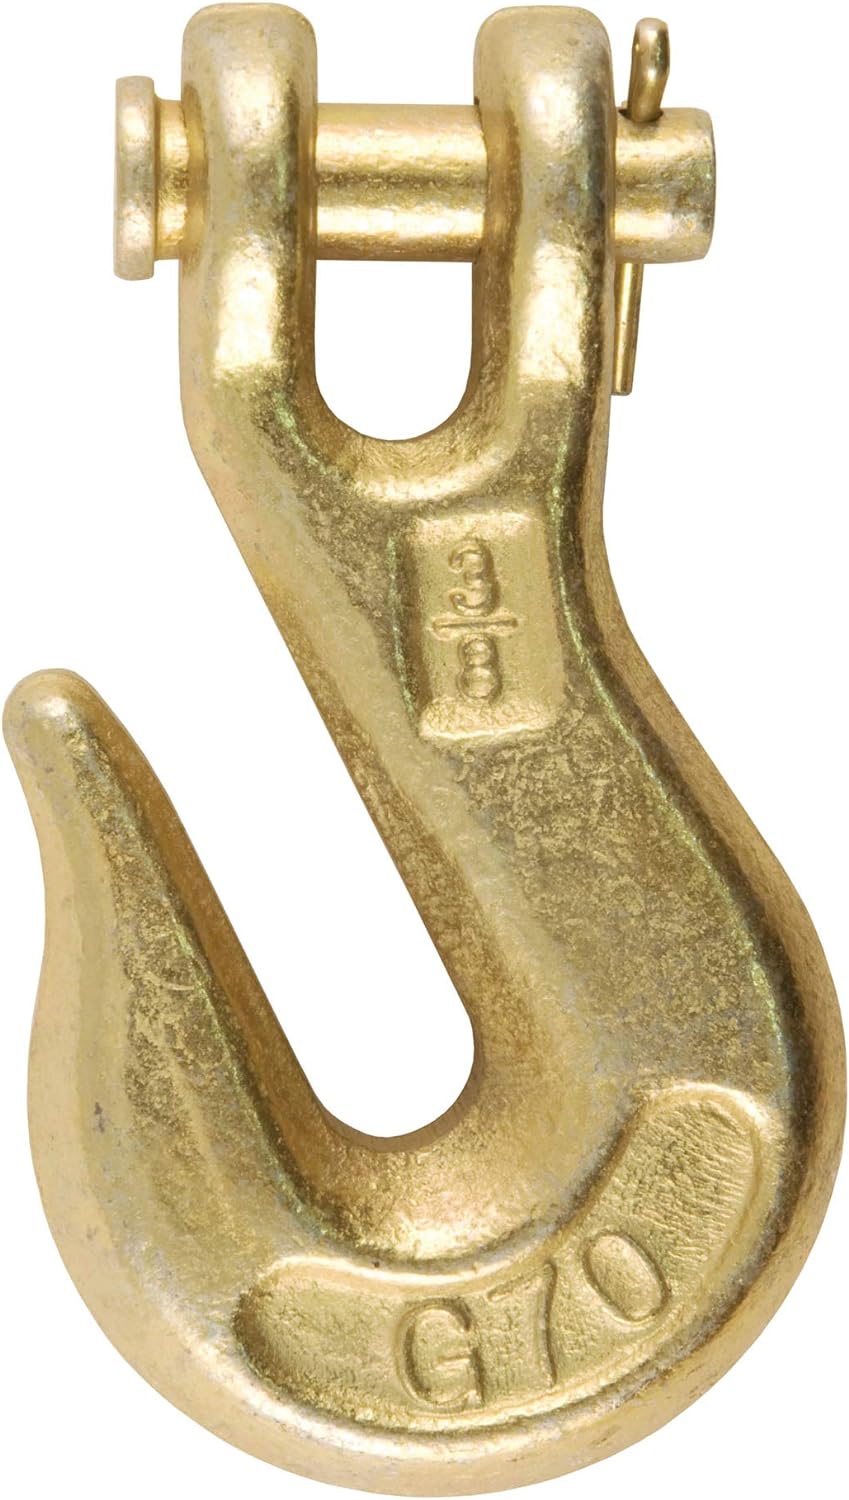 CURT 81438 3/8-Inch Forged Steel Clevis Grab Hook, 6,600 lbs. Work Load, 1/2-In Pin